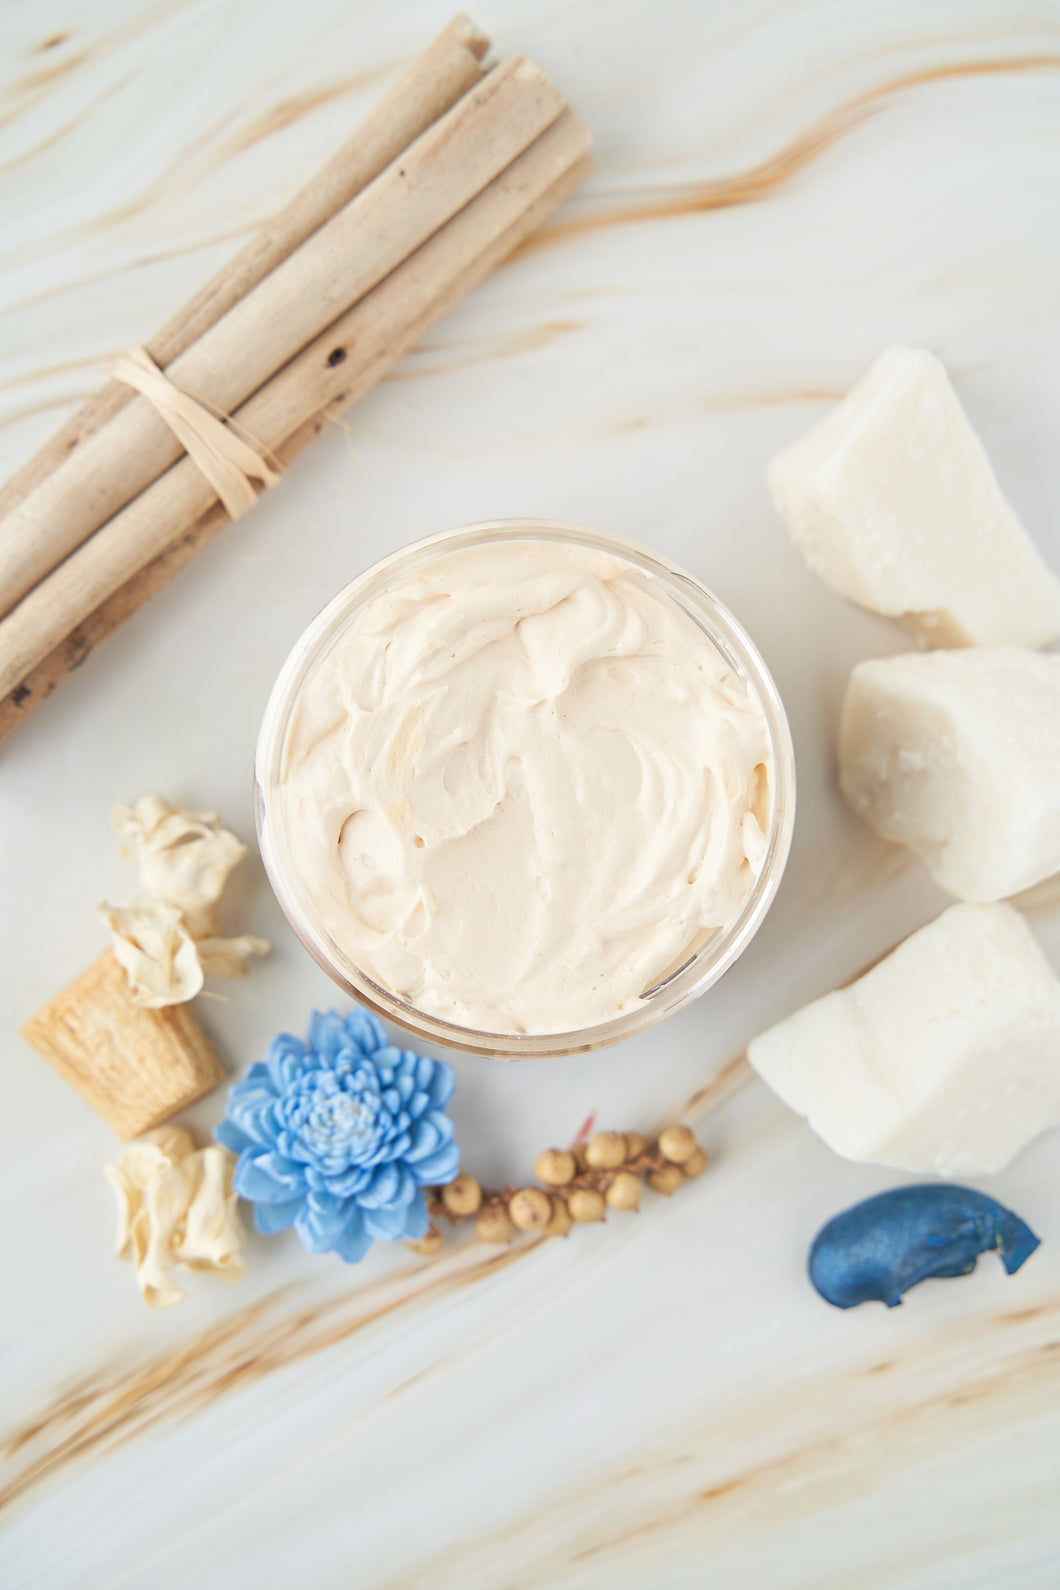 Nude/Unscented Whipped Body Butter